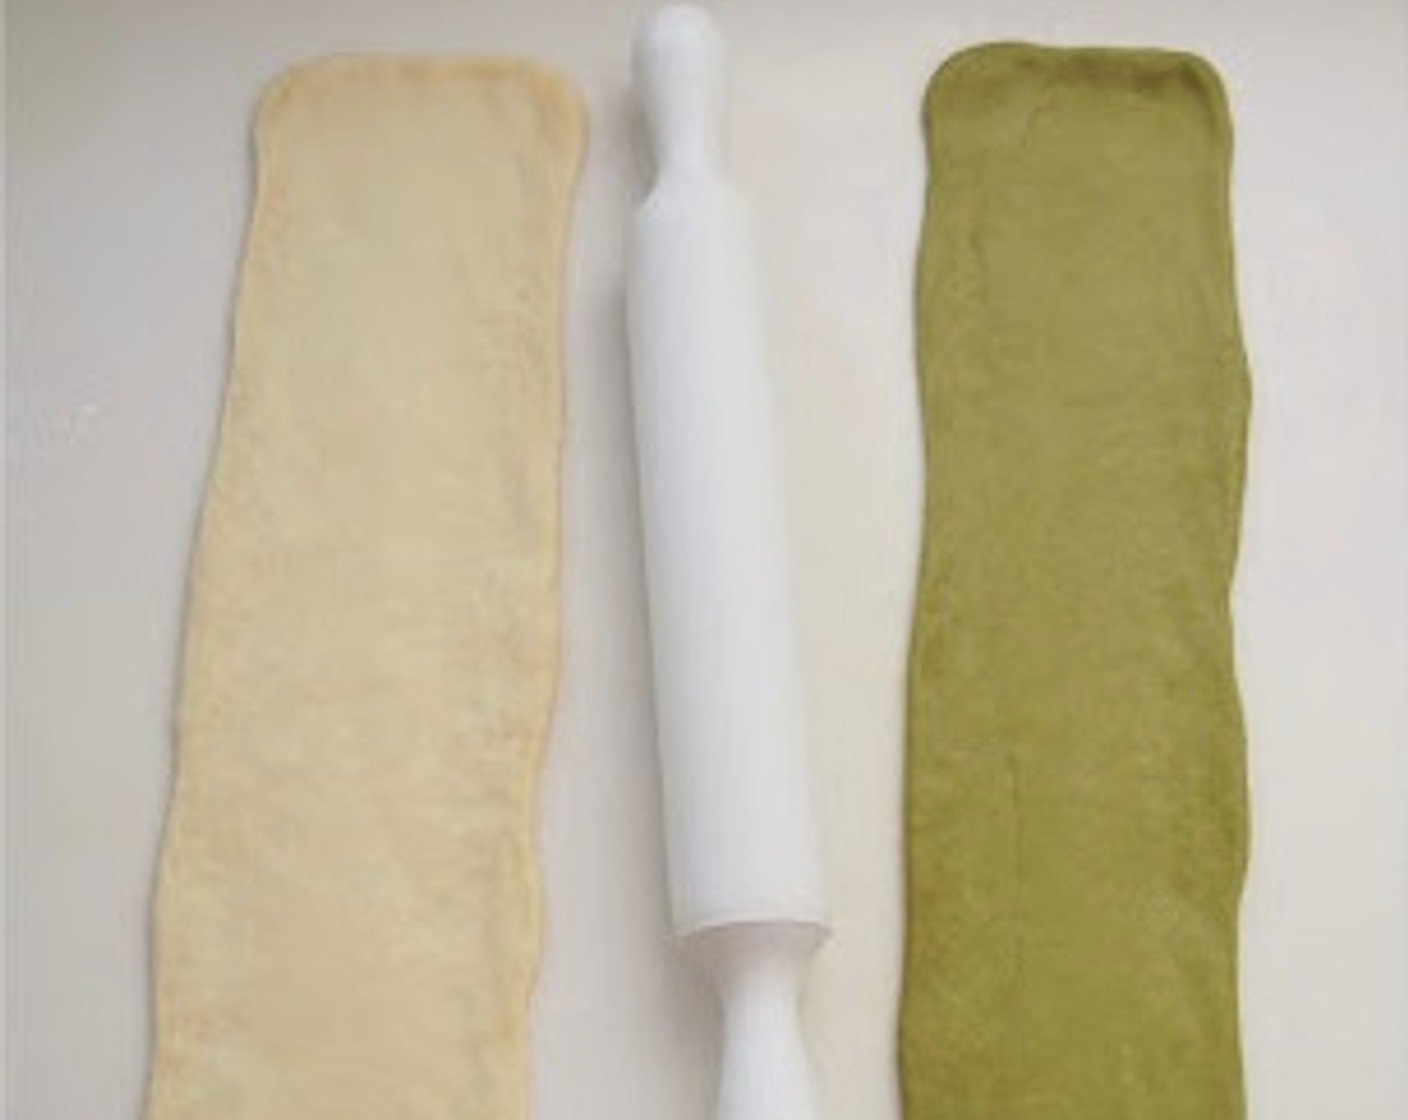 step 7 Punch down each dough to release the air. Transfer the plain dough to a clean floured surface and divide it into 2 equal portions. Shape each plain dough into a long log, about 25 centimeters. Roll out each log with a rolling pin into a long rectangle shape, about 45x10 centimeters. Repeat with the matcha dough.